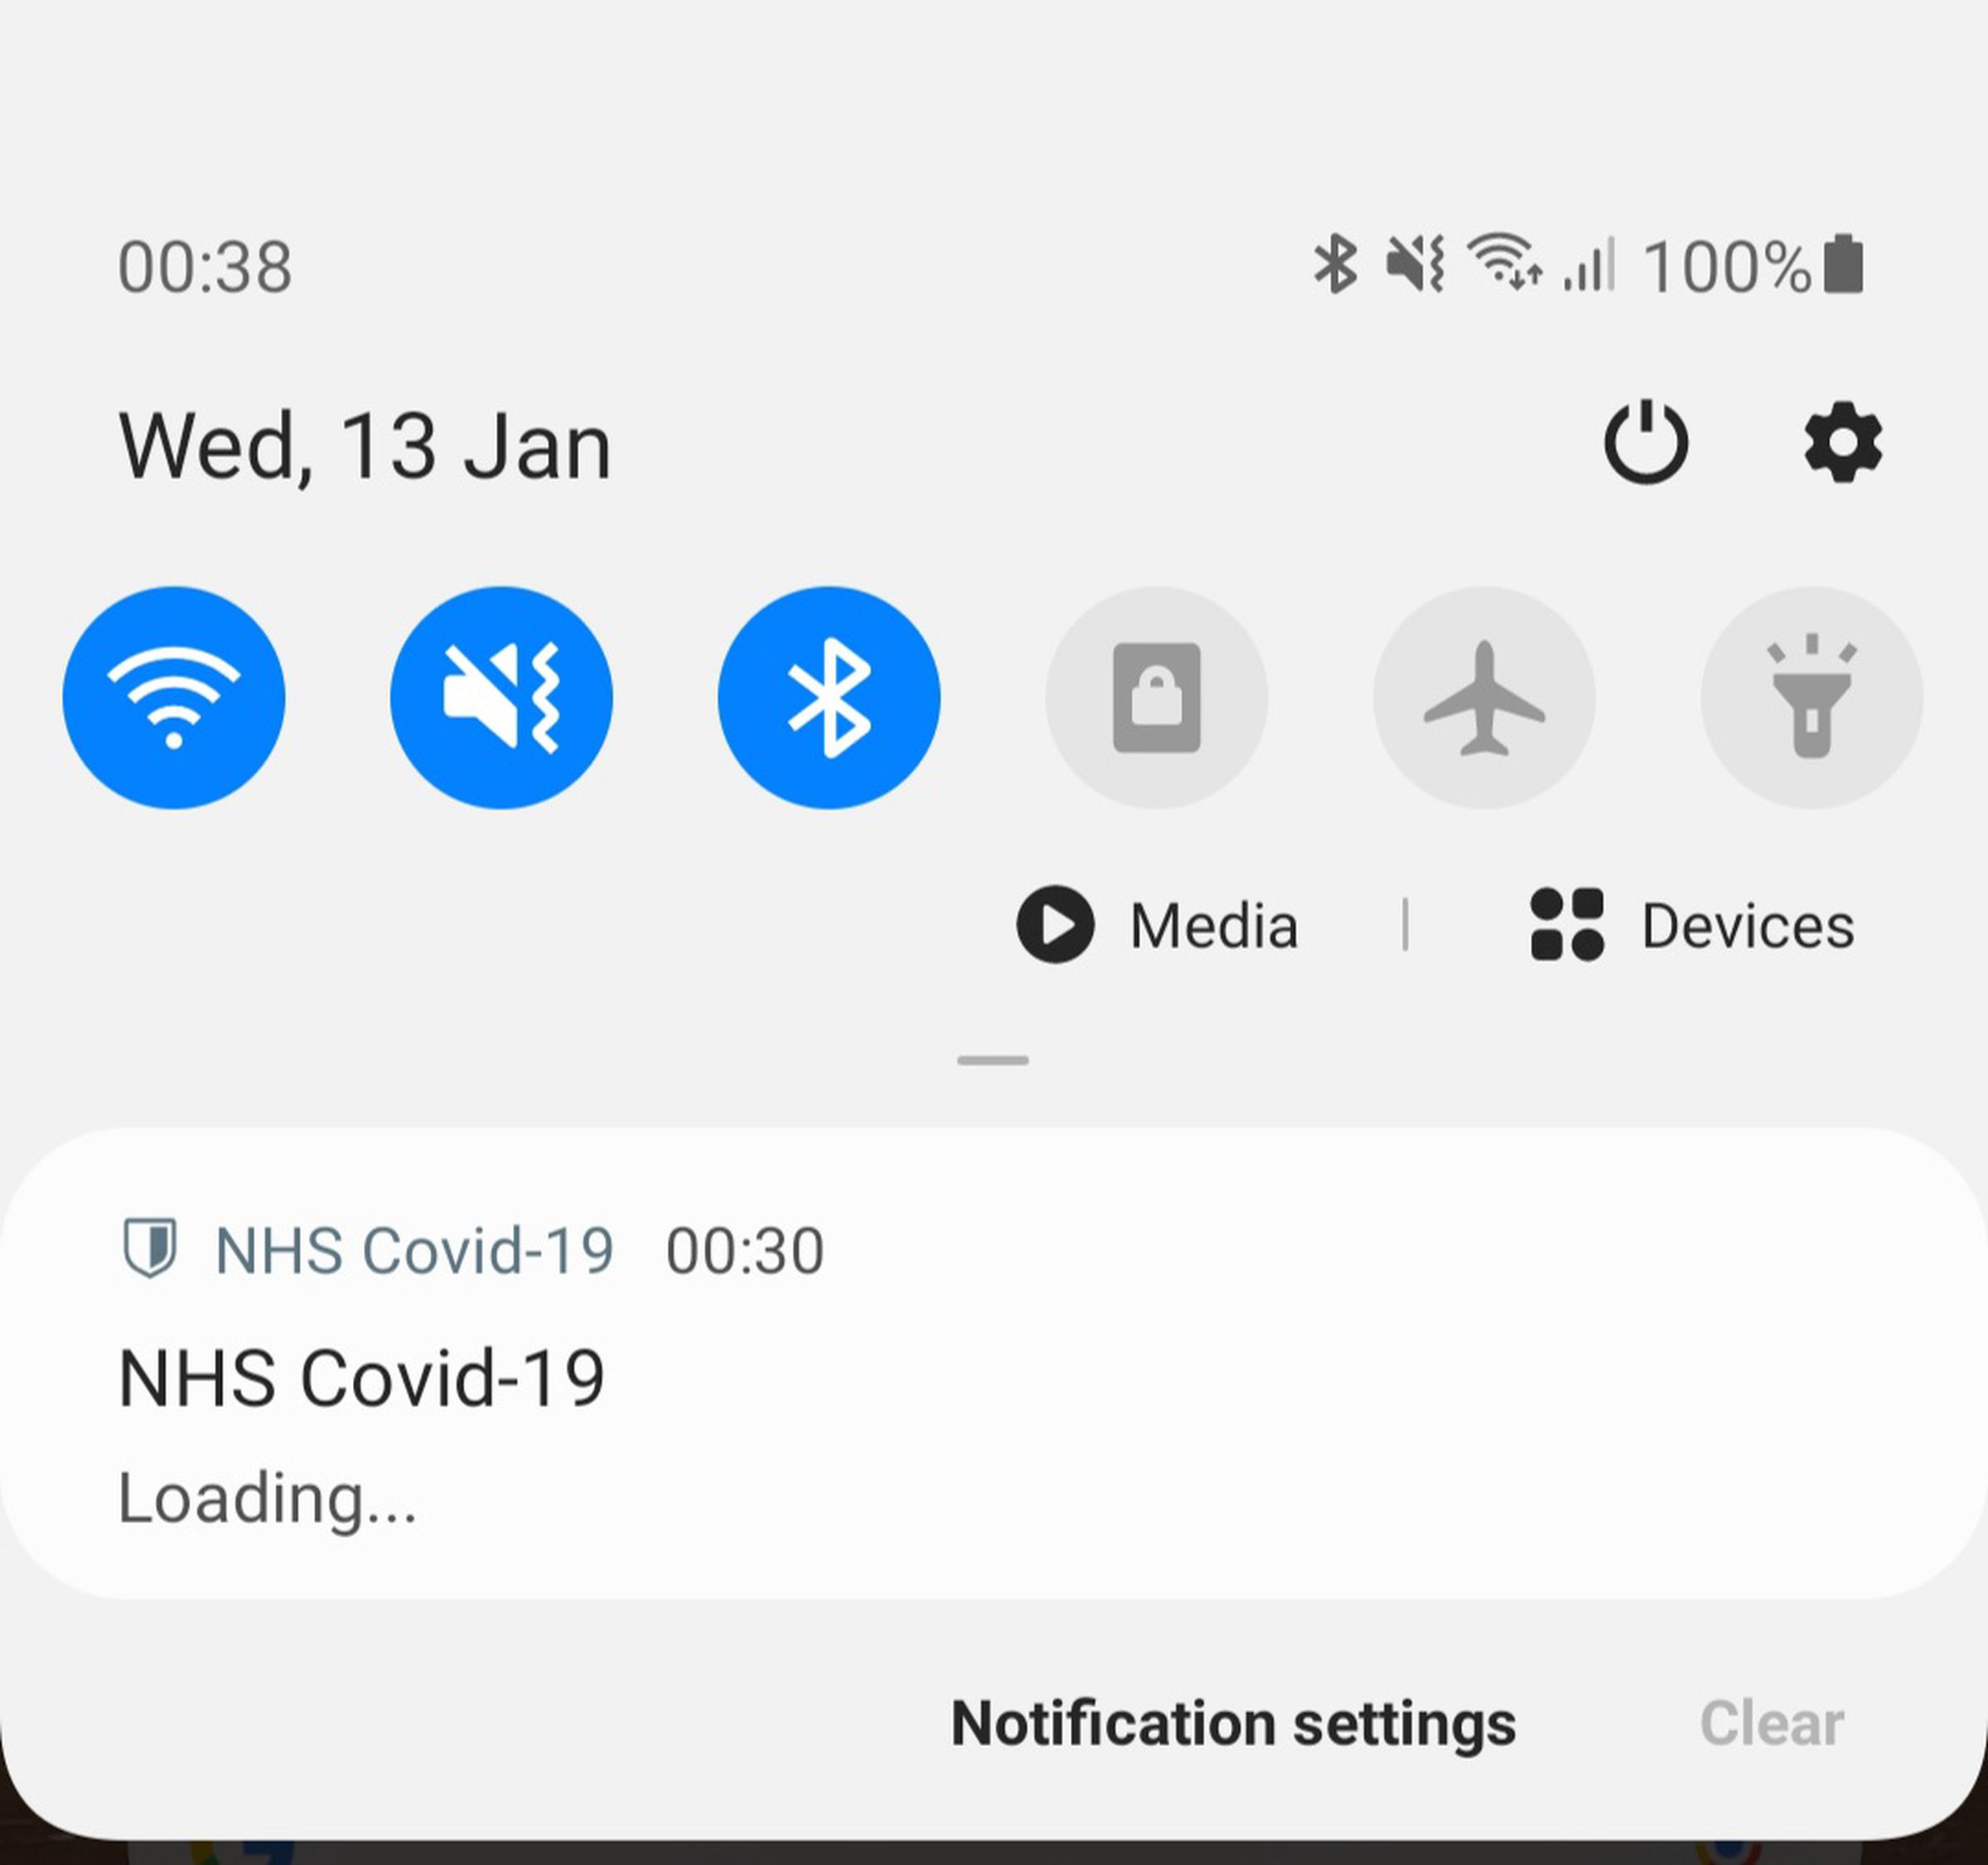 The NHS COVID-19 notification issue.